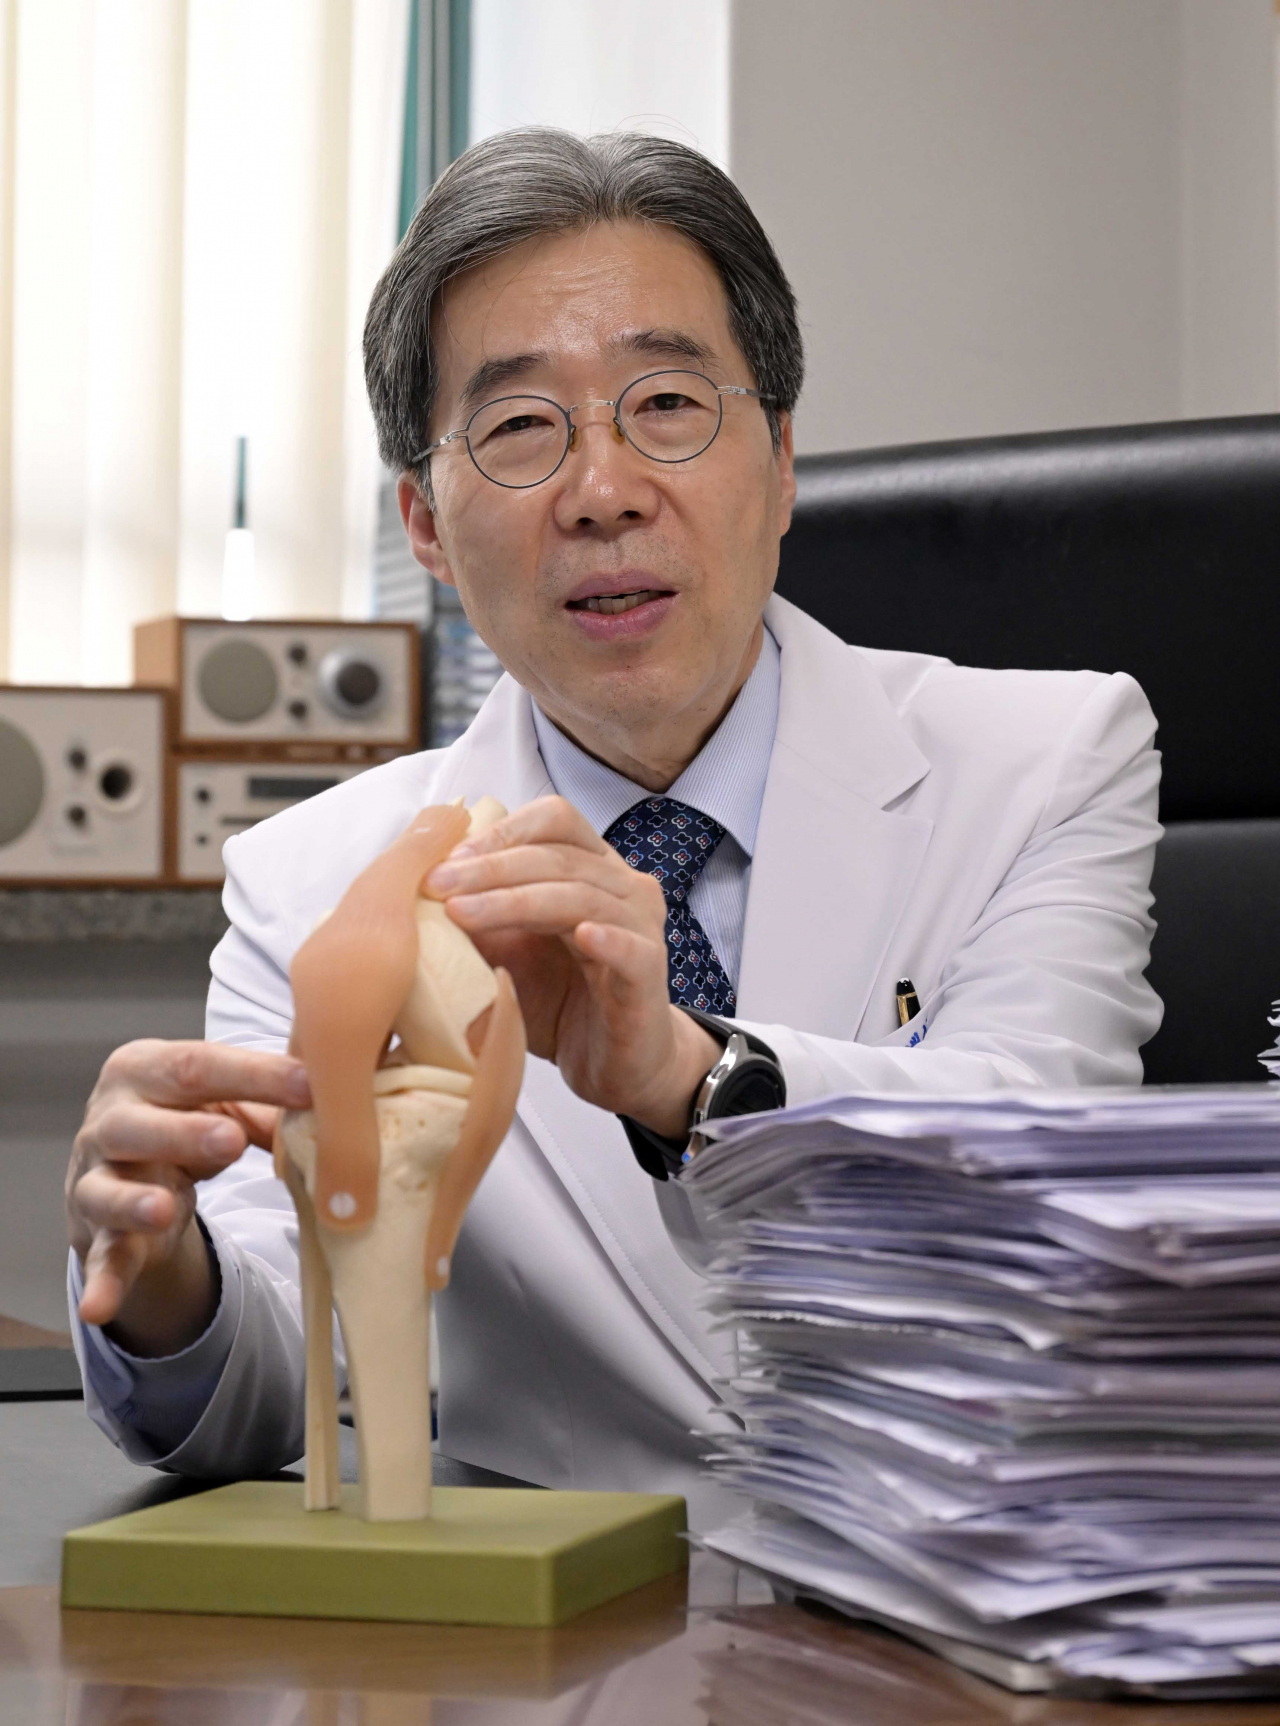 Dr. Bae Sang-cheol speaks during an interview at his office at Hanyang University Hospital for Rheumatic Diseases in Seoul, on April 19. (Lee Sang-sub/The Korea Herald)